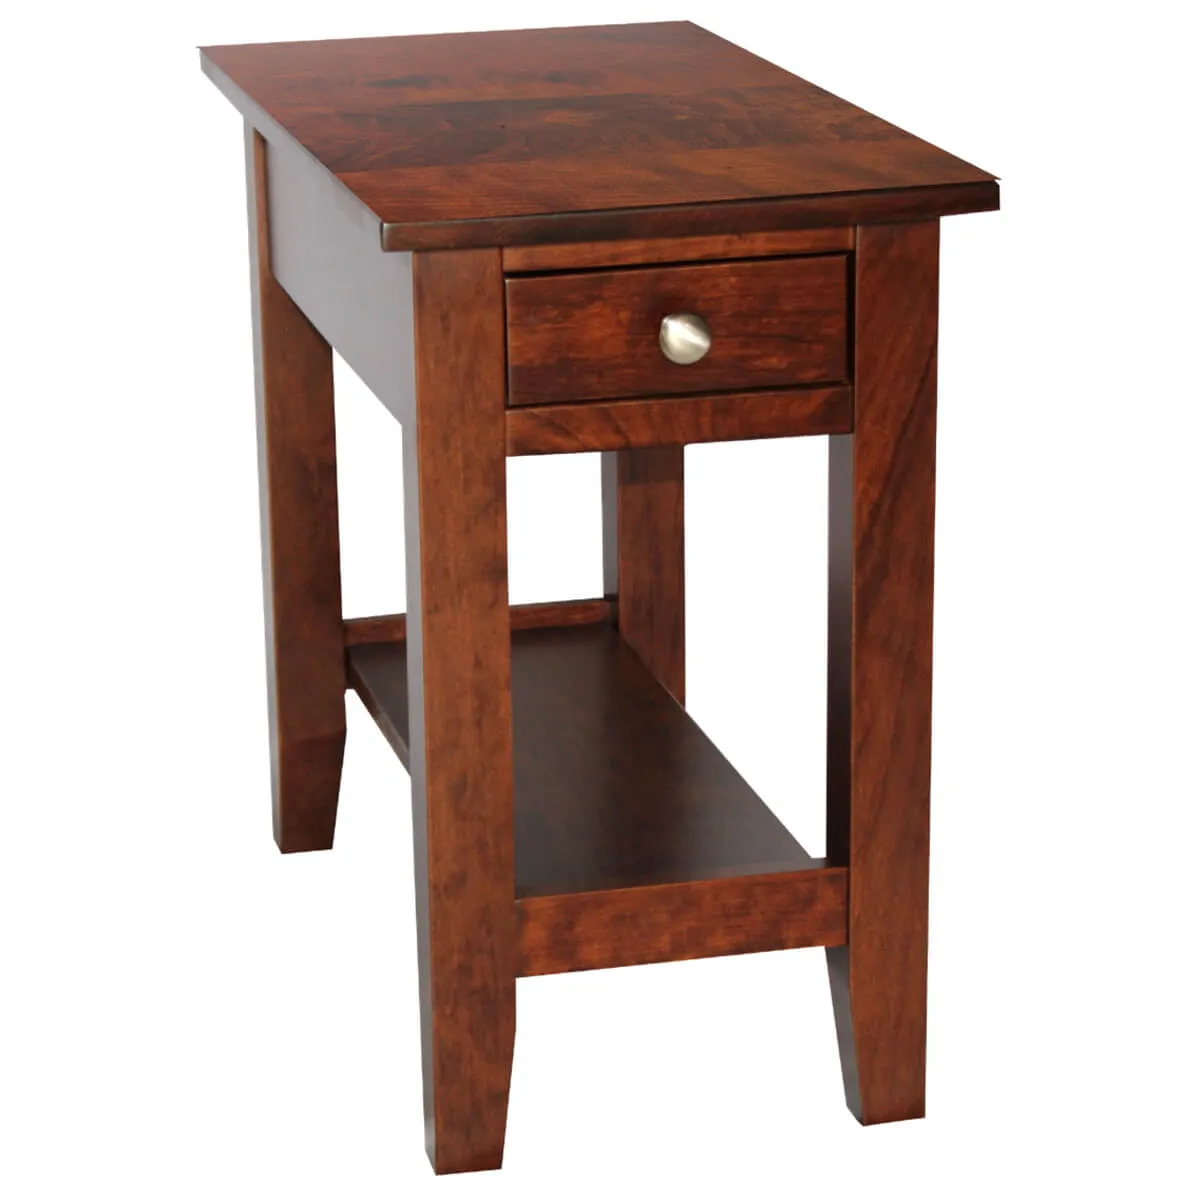 Parkview End Table